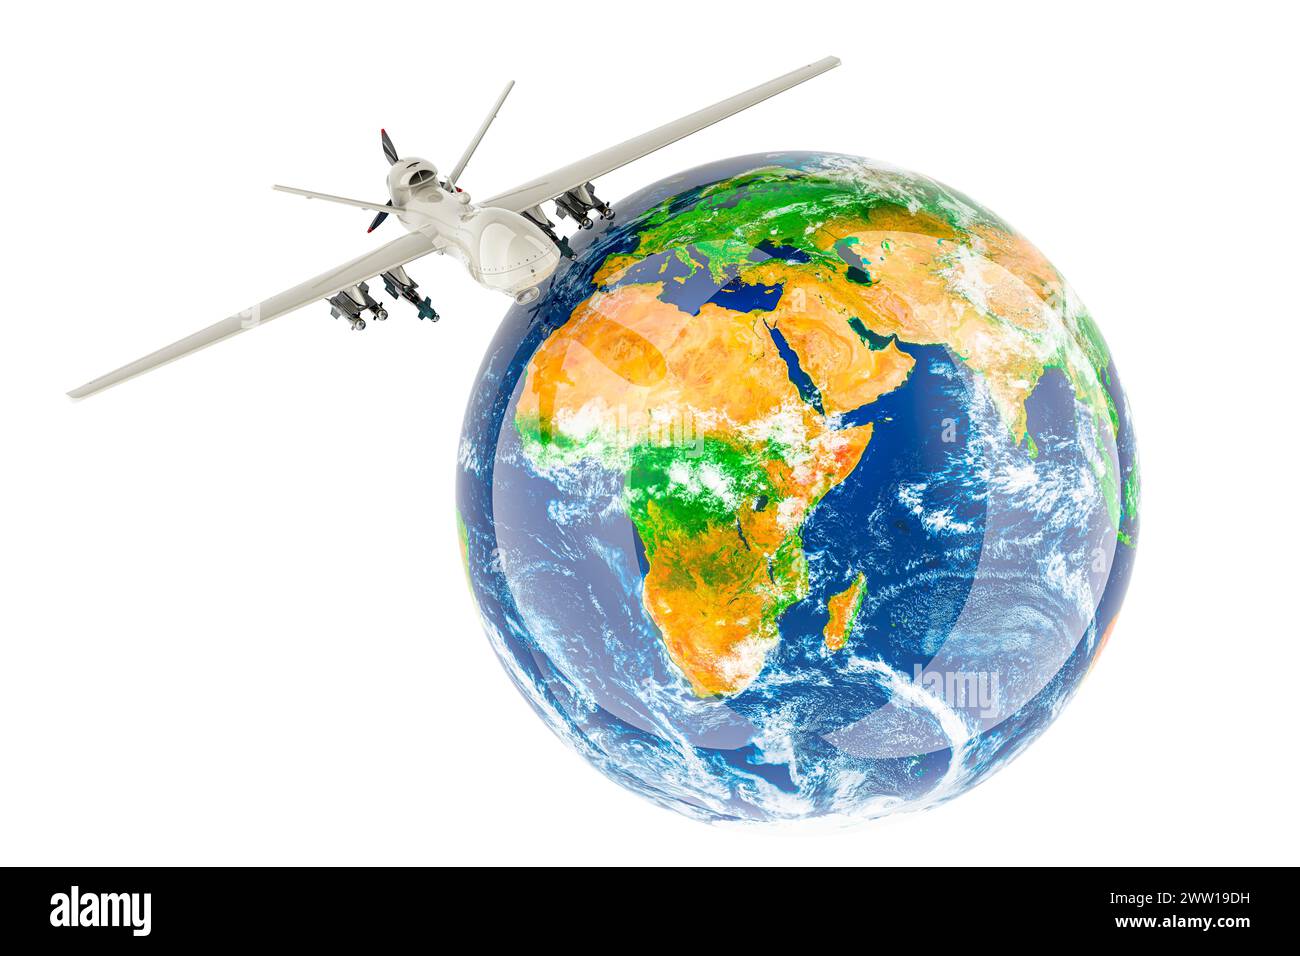 Military drone flying above Earth Globe. 3D rendering isolated on white background Stock Photo